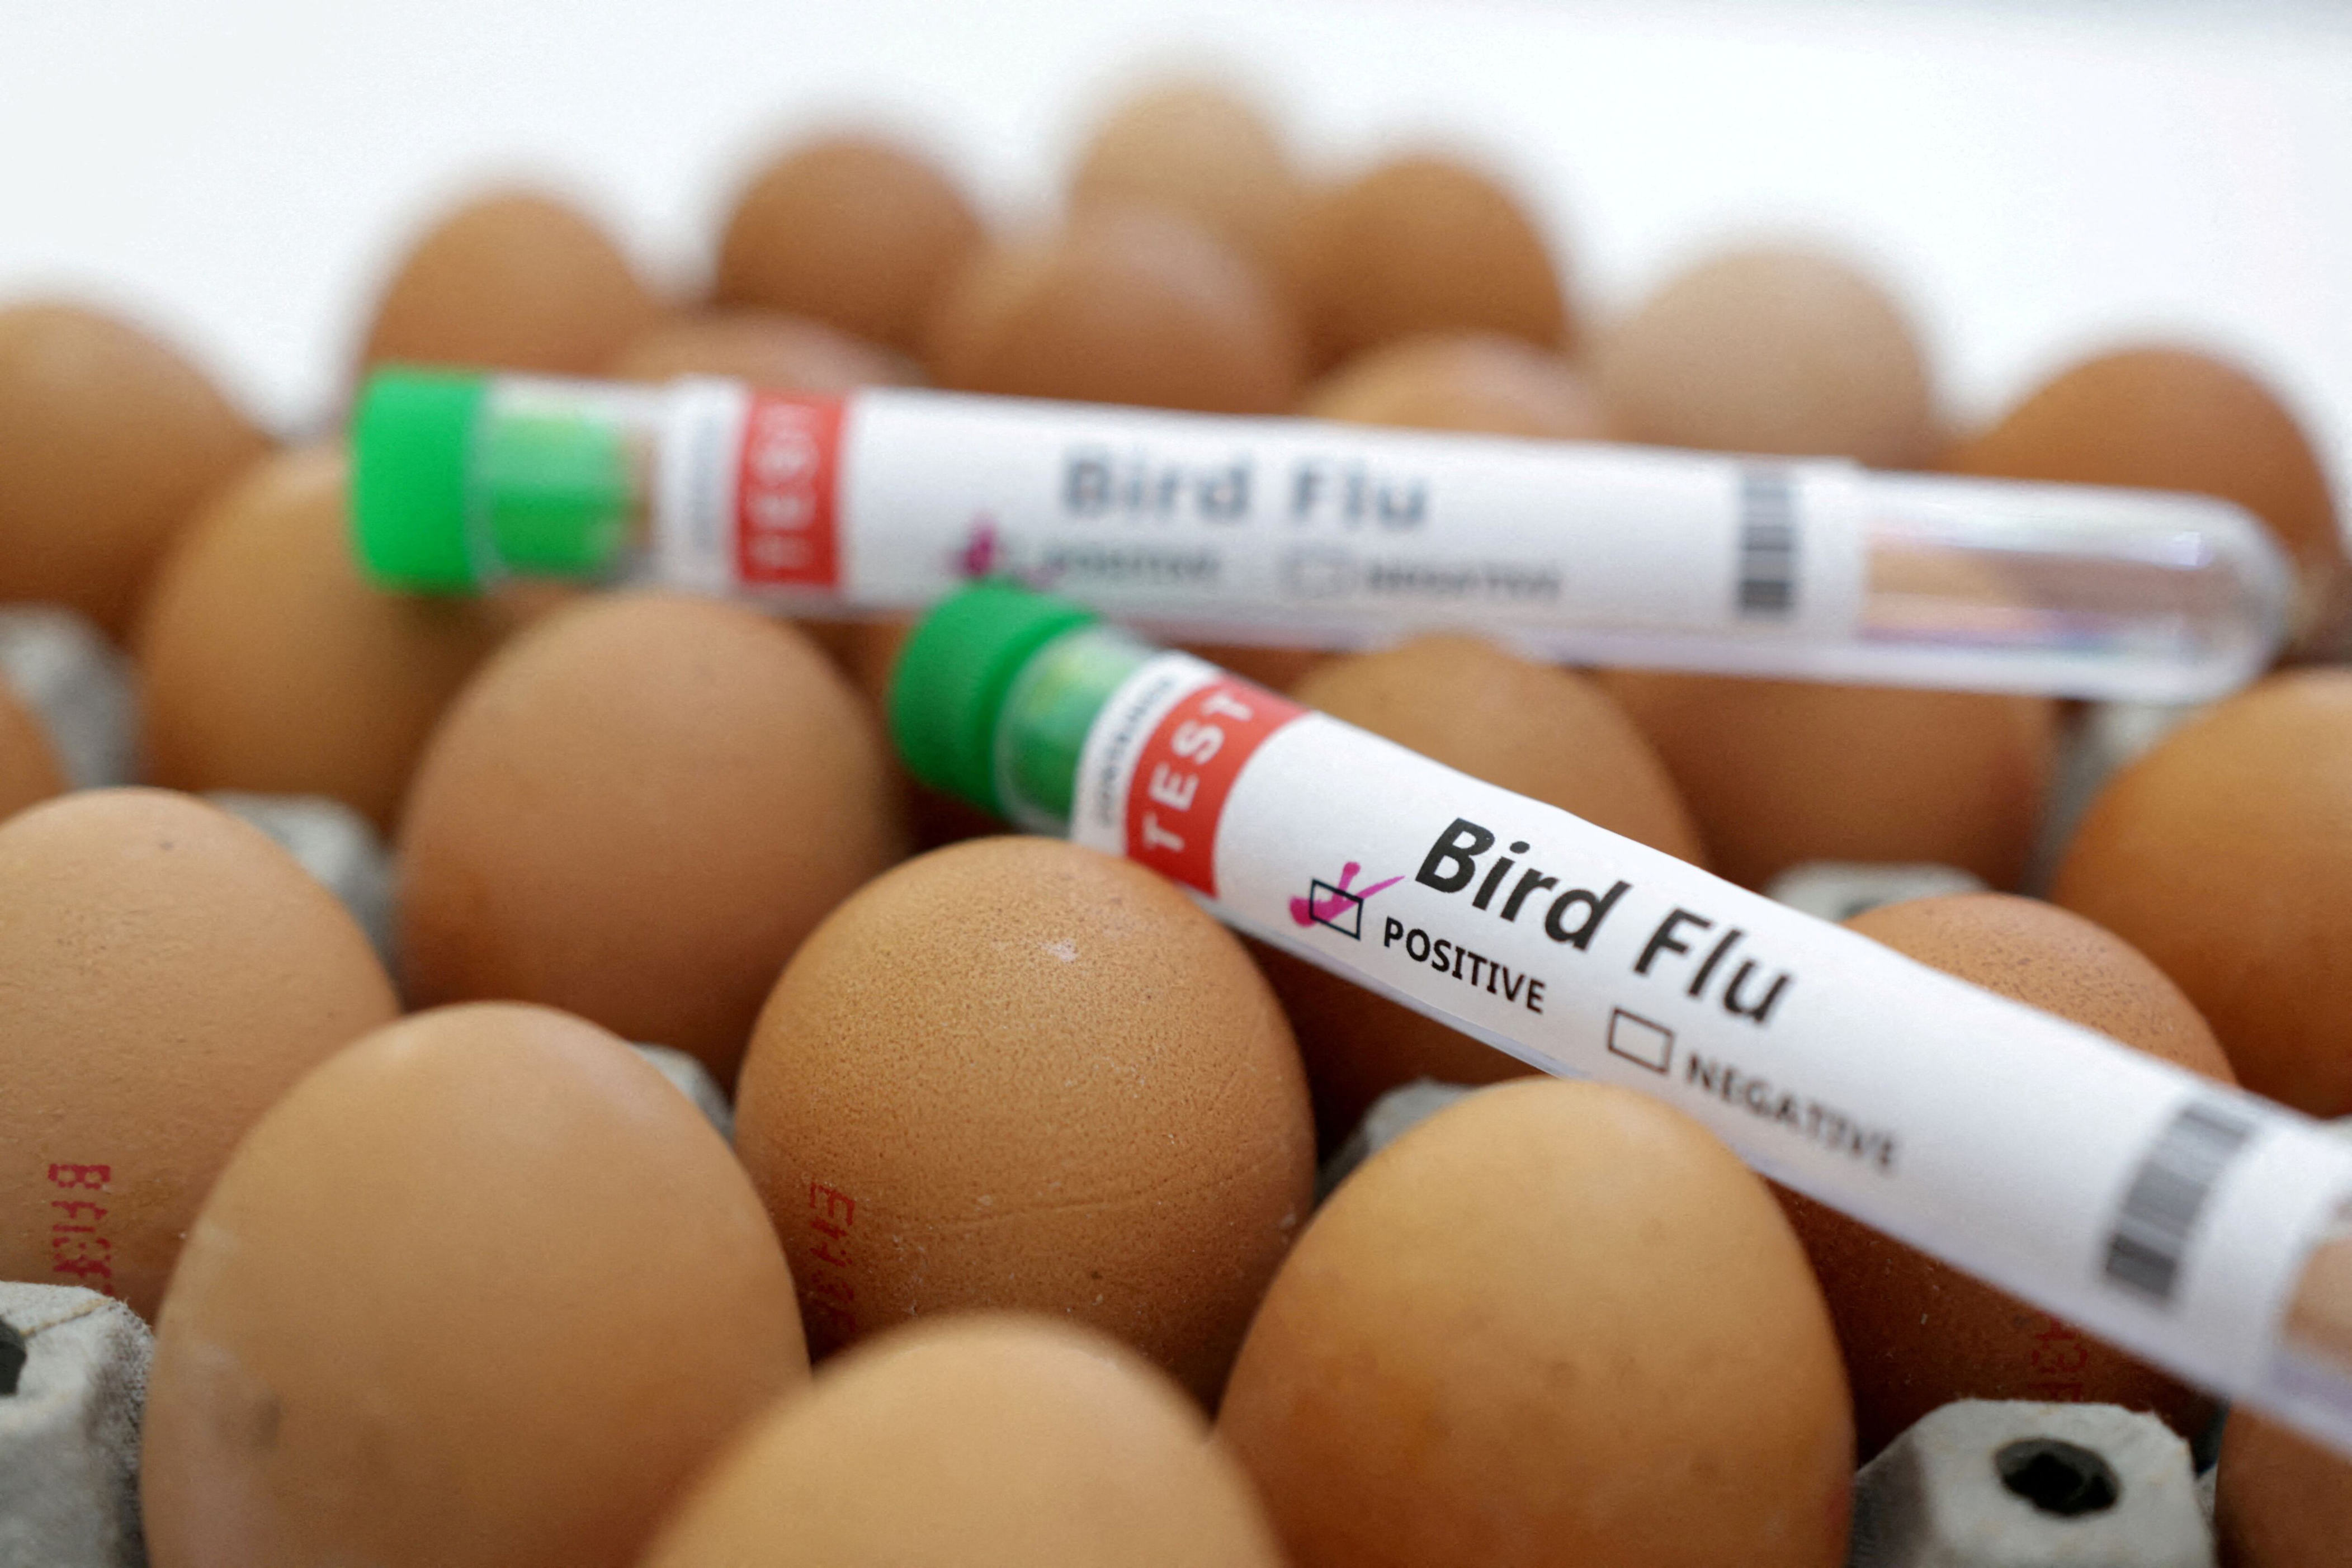 should we be worried as bird flu spreads into us dairy herds?